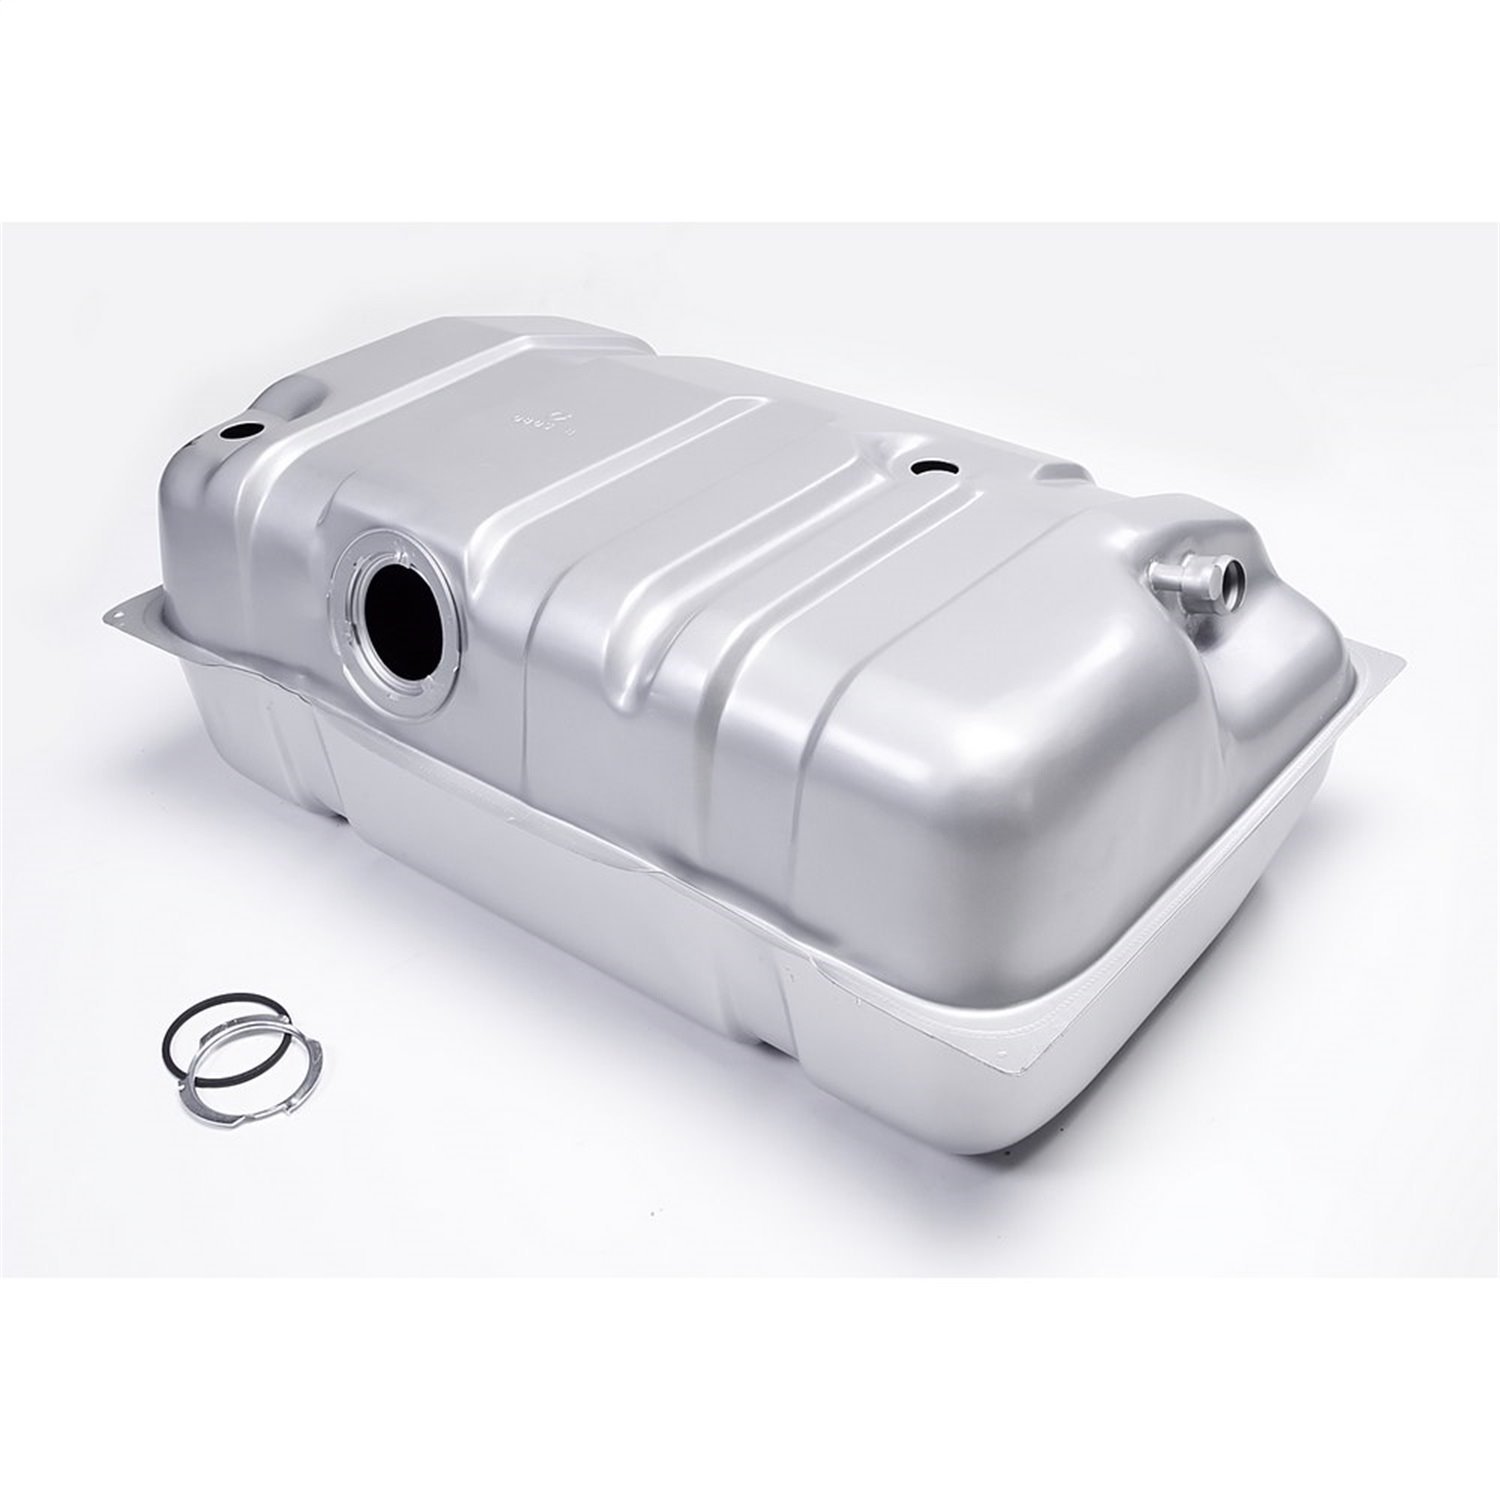 Gas/Fuel Tank 13.5 or 20.2 Gallon 1984-1986 Cherokee 2.5L With Carb and 2.8L 1986-1994 Cherokee 2.1L